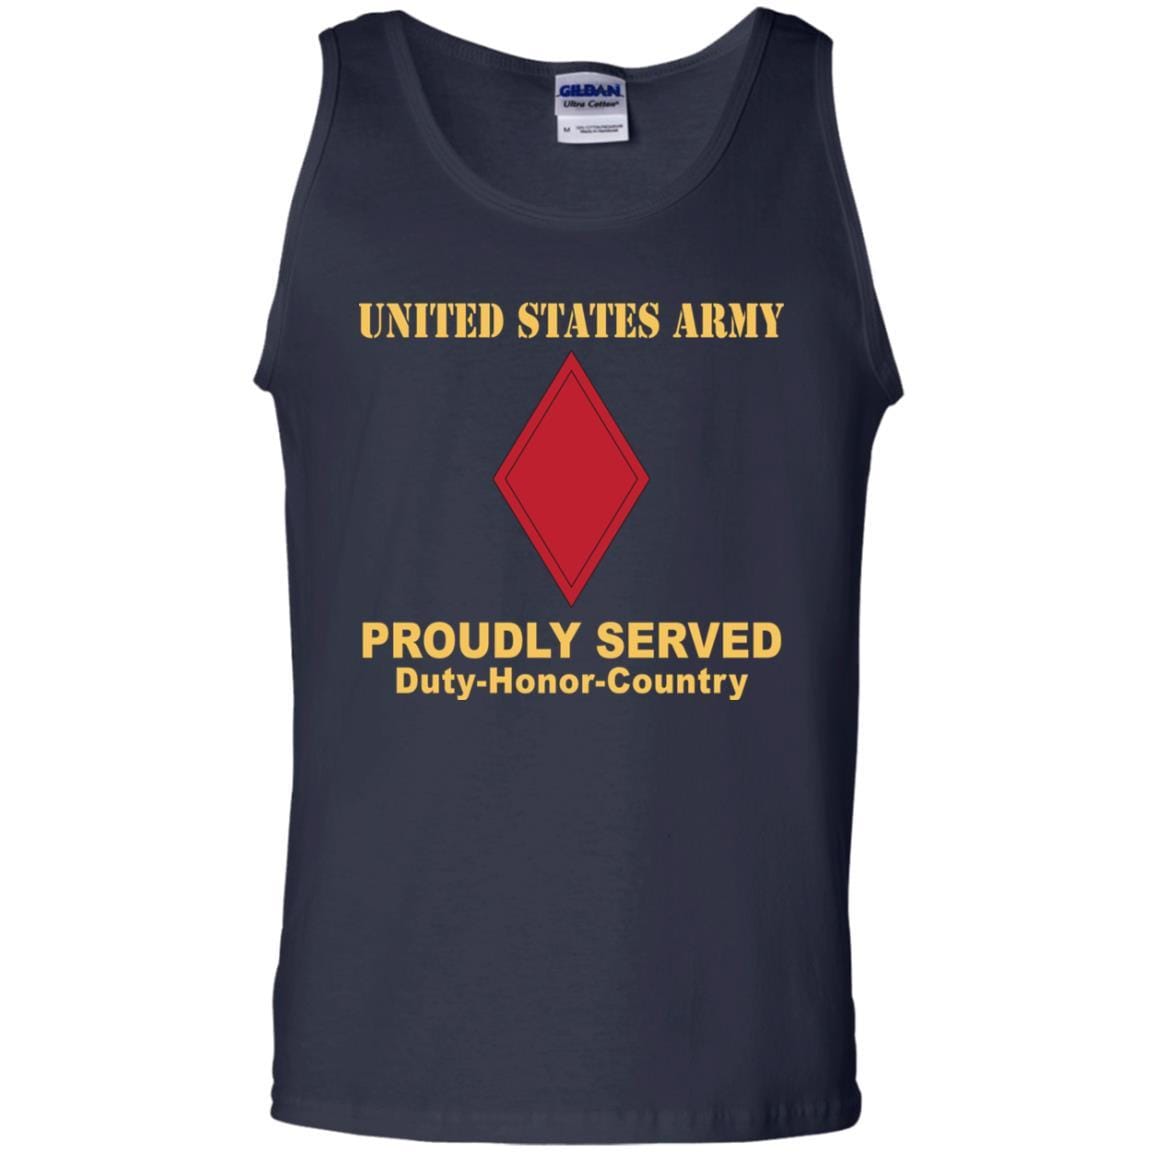 US ARMY 5TH INFANTRY DIVISION- Proudly Served T-Shirt On Front For Men-TShirt-Army-Veterans Nation